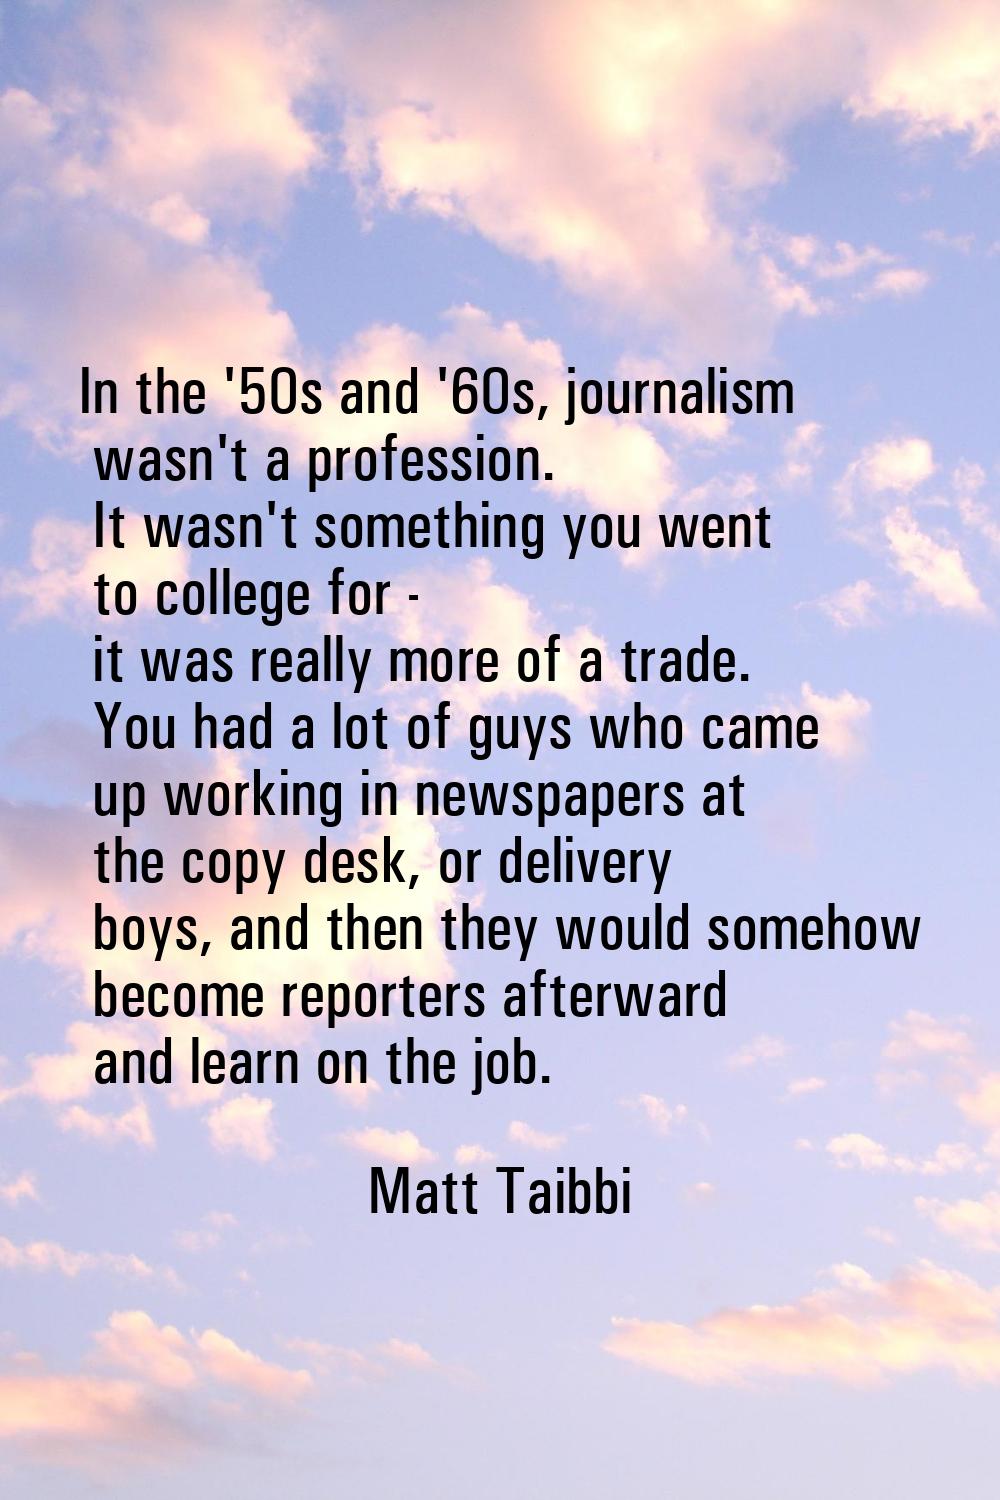 In the '50s and '60s, journalism wasn't a profession. It wasn't something you went to college for -